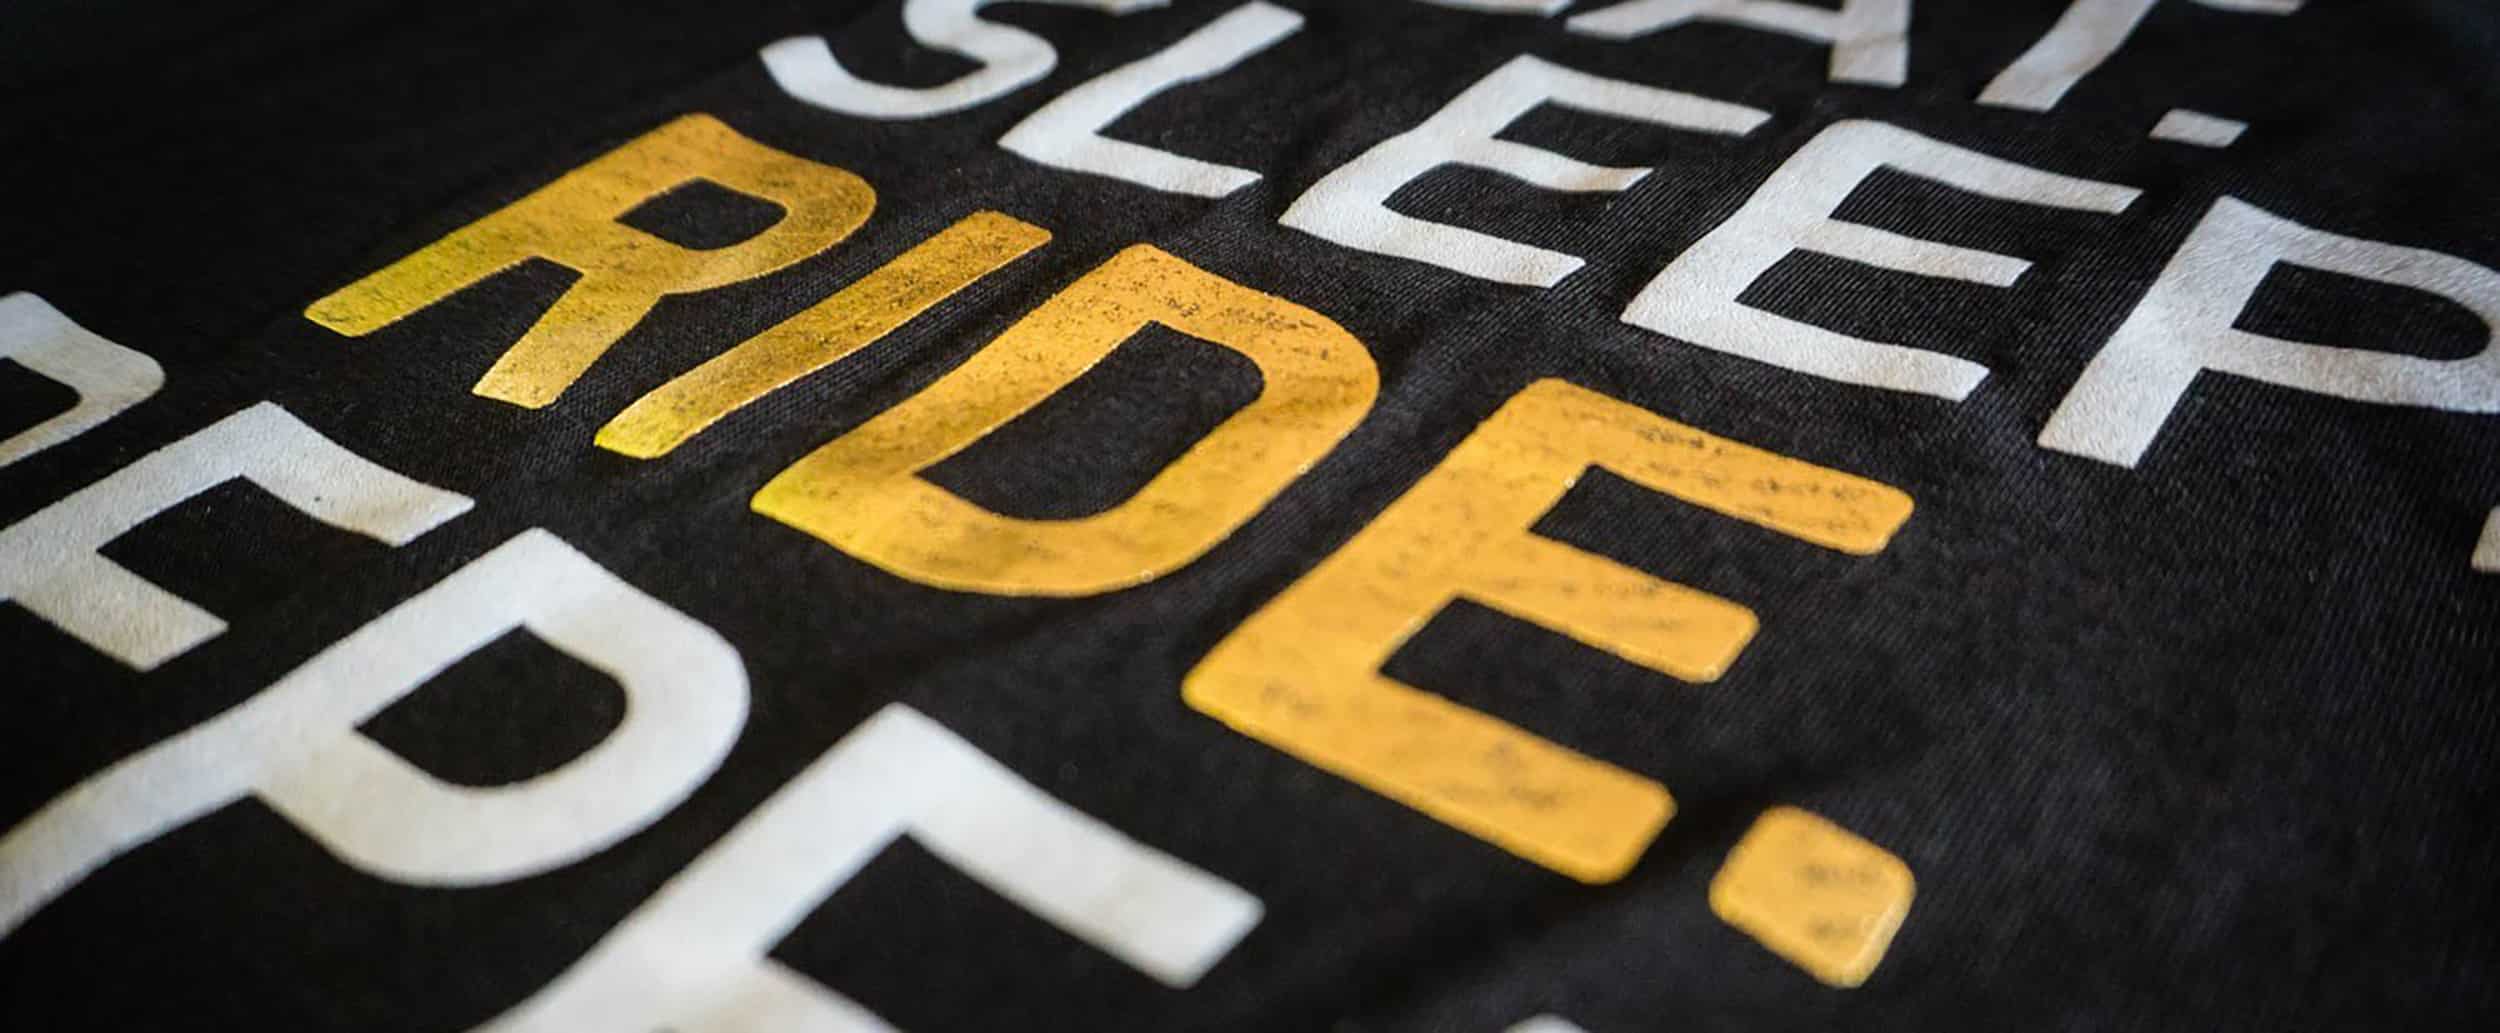 Screen Printing with Foils and Metallic Inks: Weighing the Pros vs. Cons